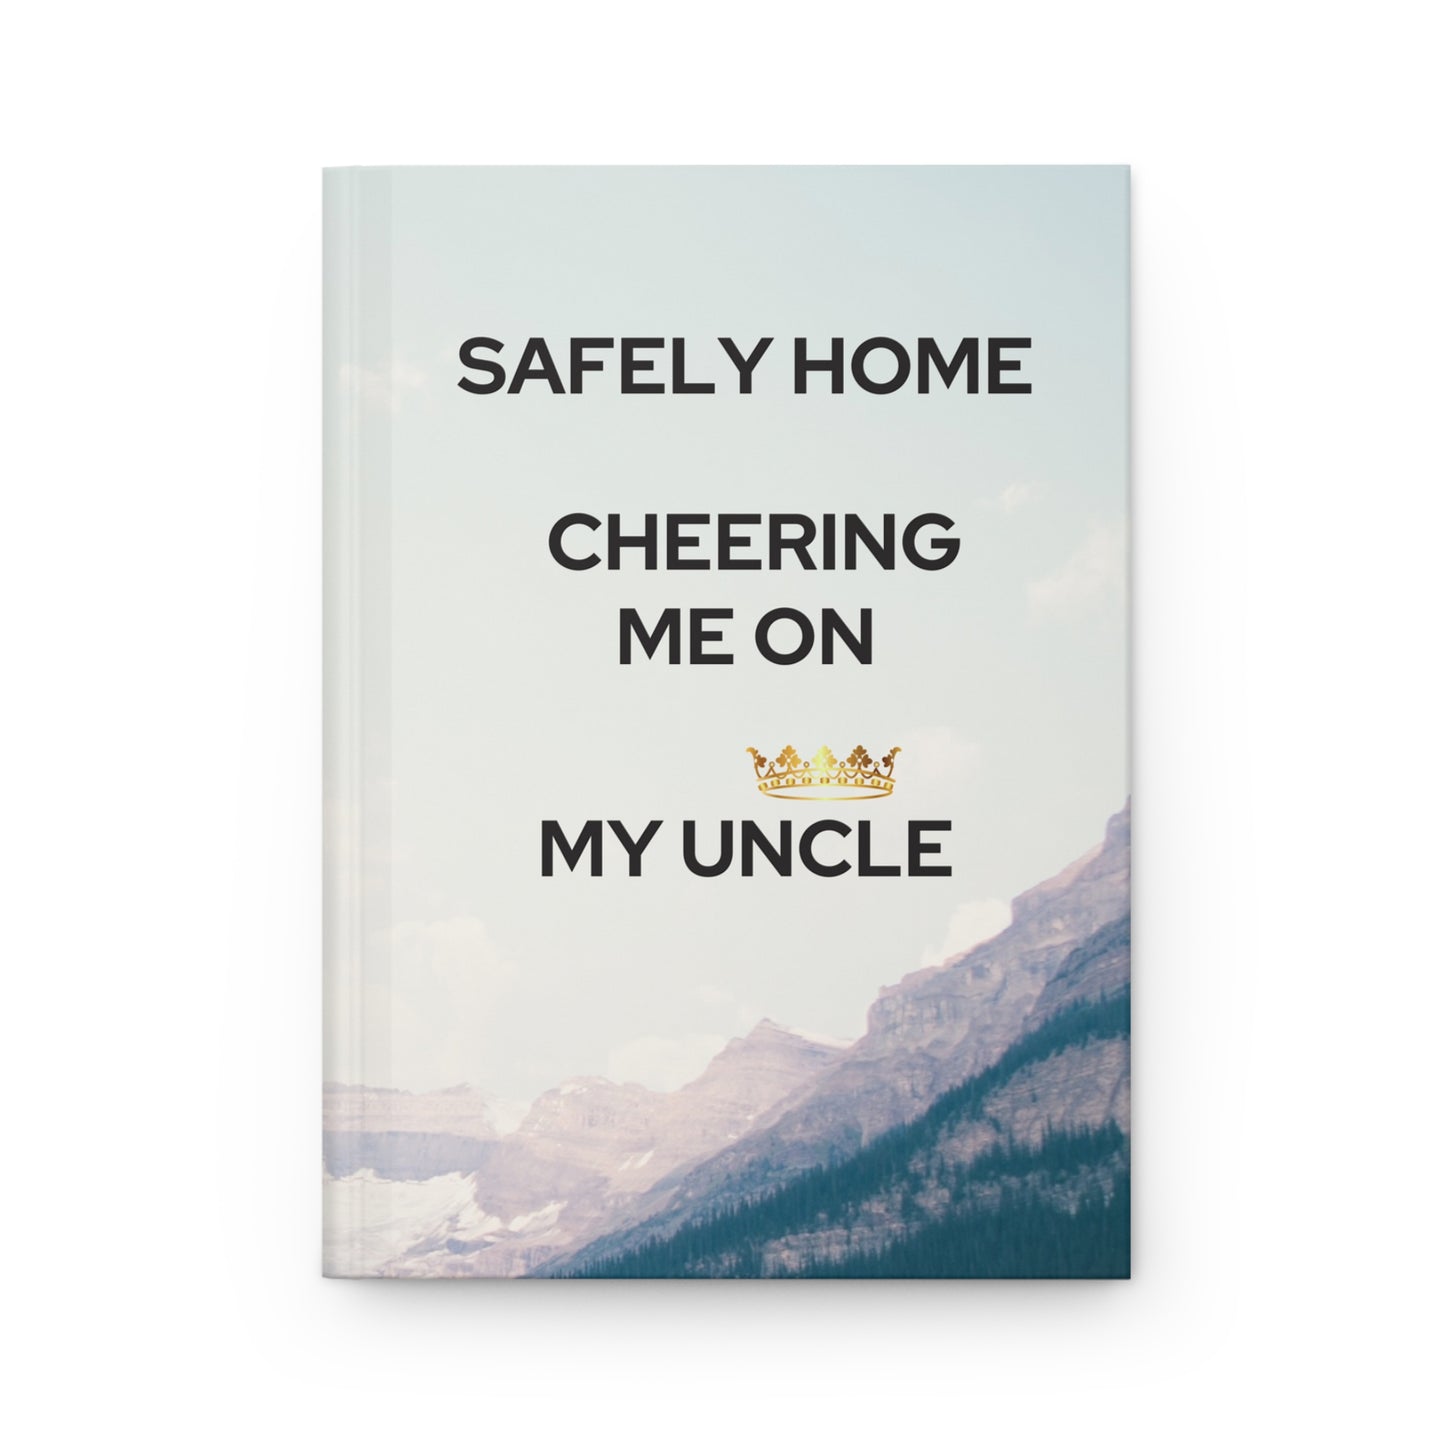 Grief Journal for Loss of Uncle, Safely Home Cheering Me On